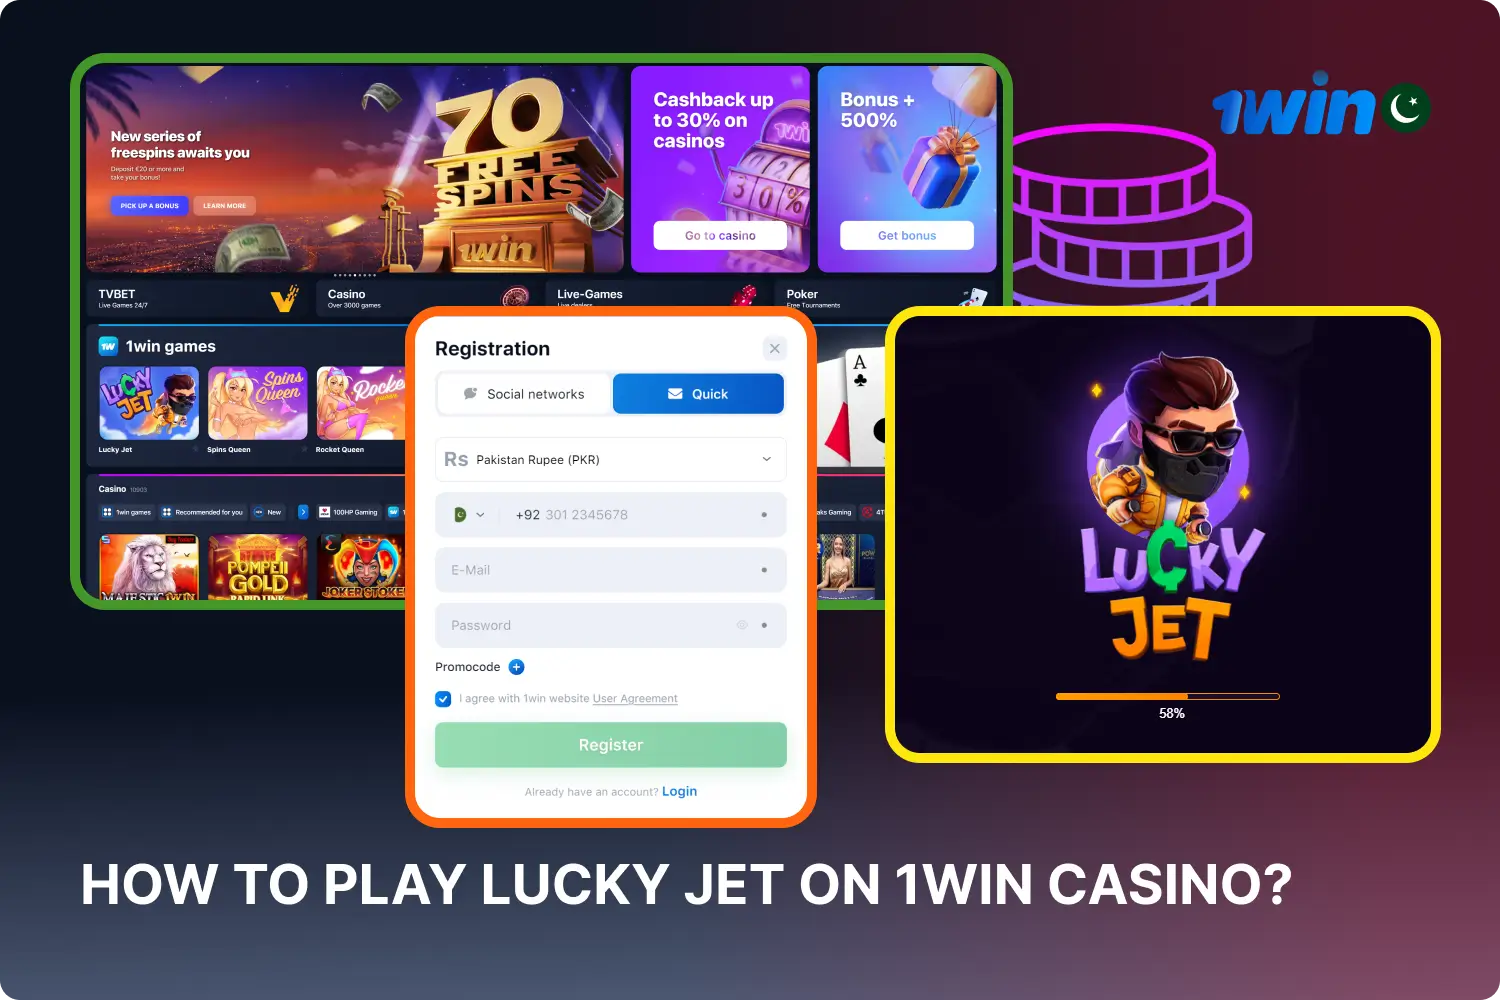 Players from Pakistan can start playing Lucky Jet at 1win after registering on the site, making a deposit and familiarising themselves with the rules of the game